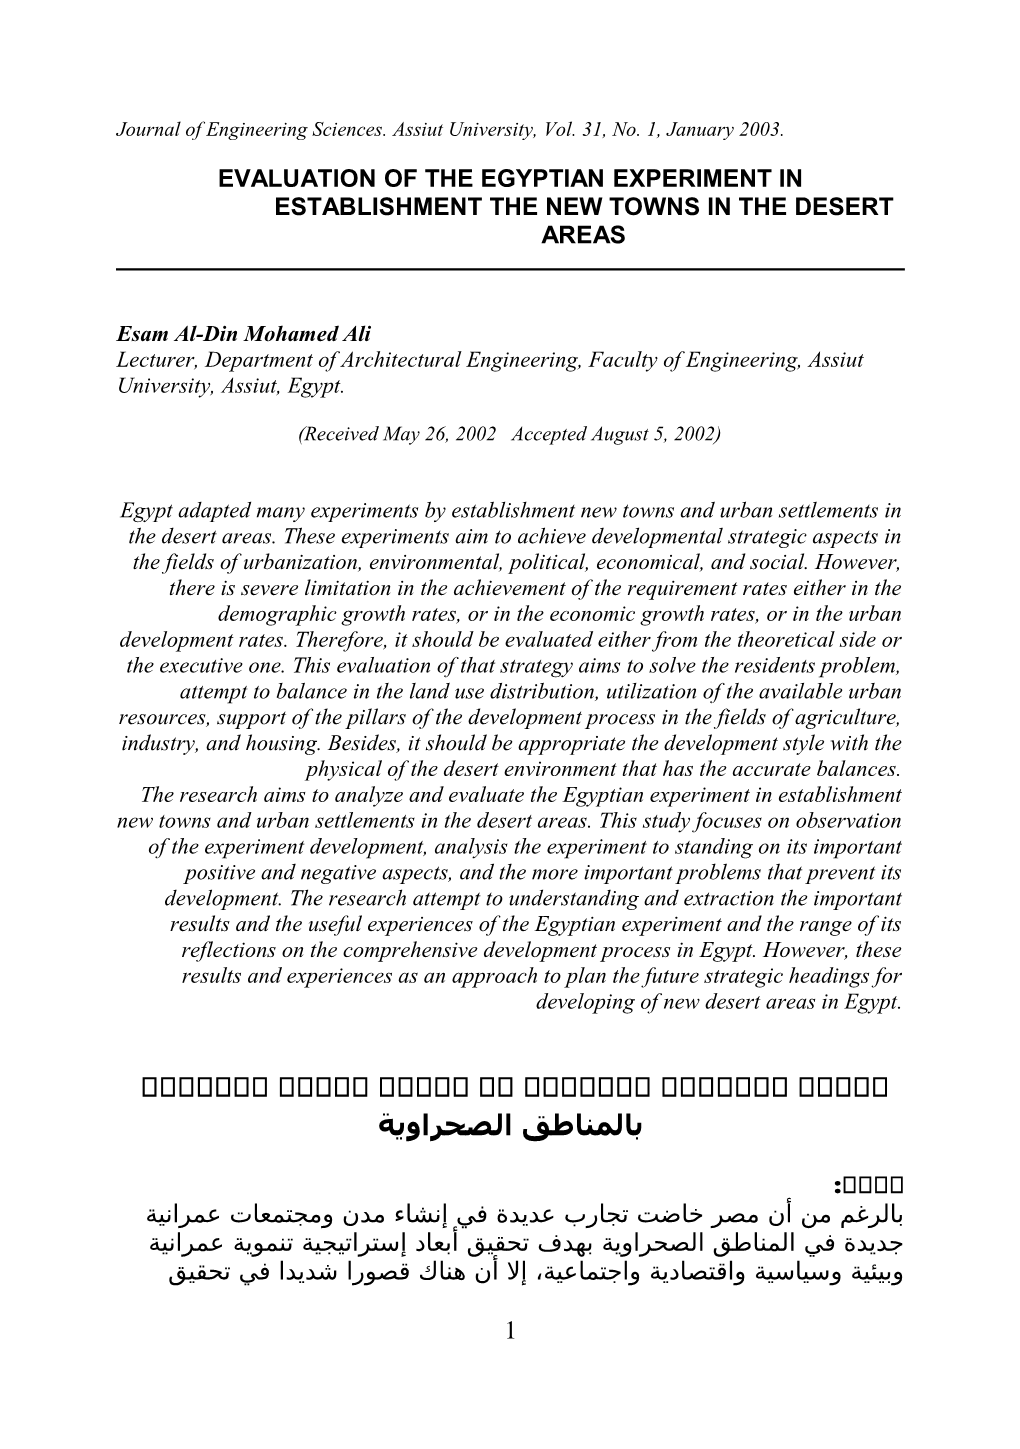 Evaluation of the Egyptian Experiment in Establishment the New Towns in the Desert Areas